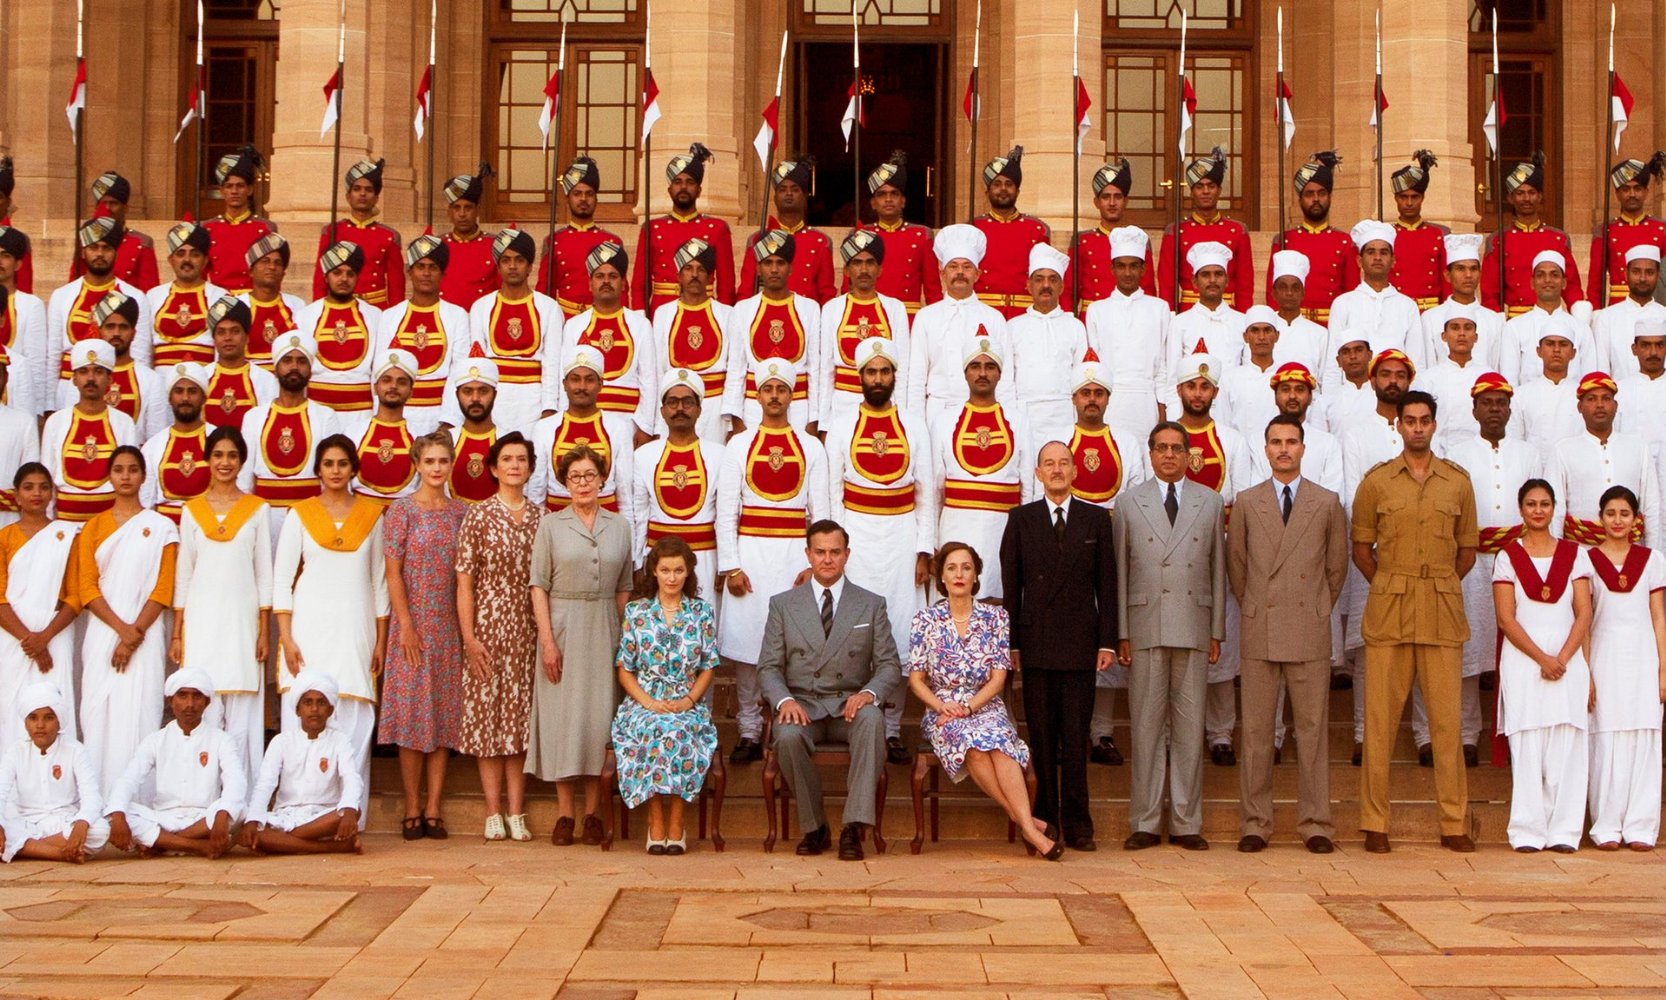 Watch Viceroy's House